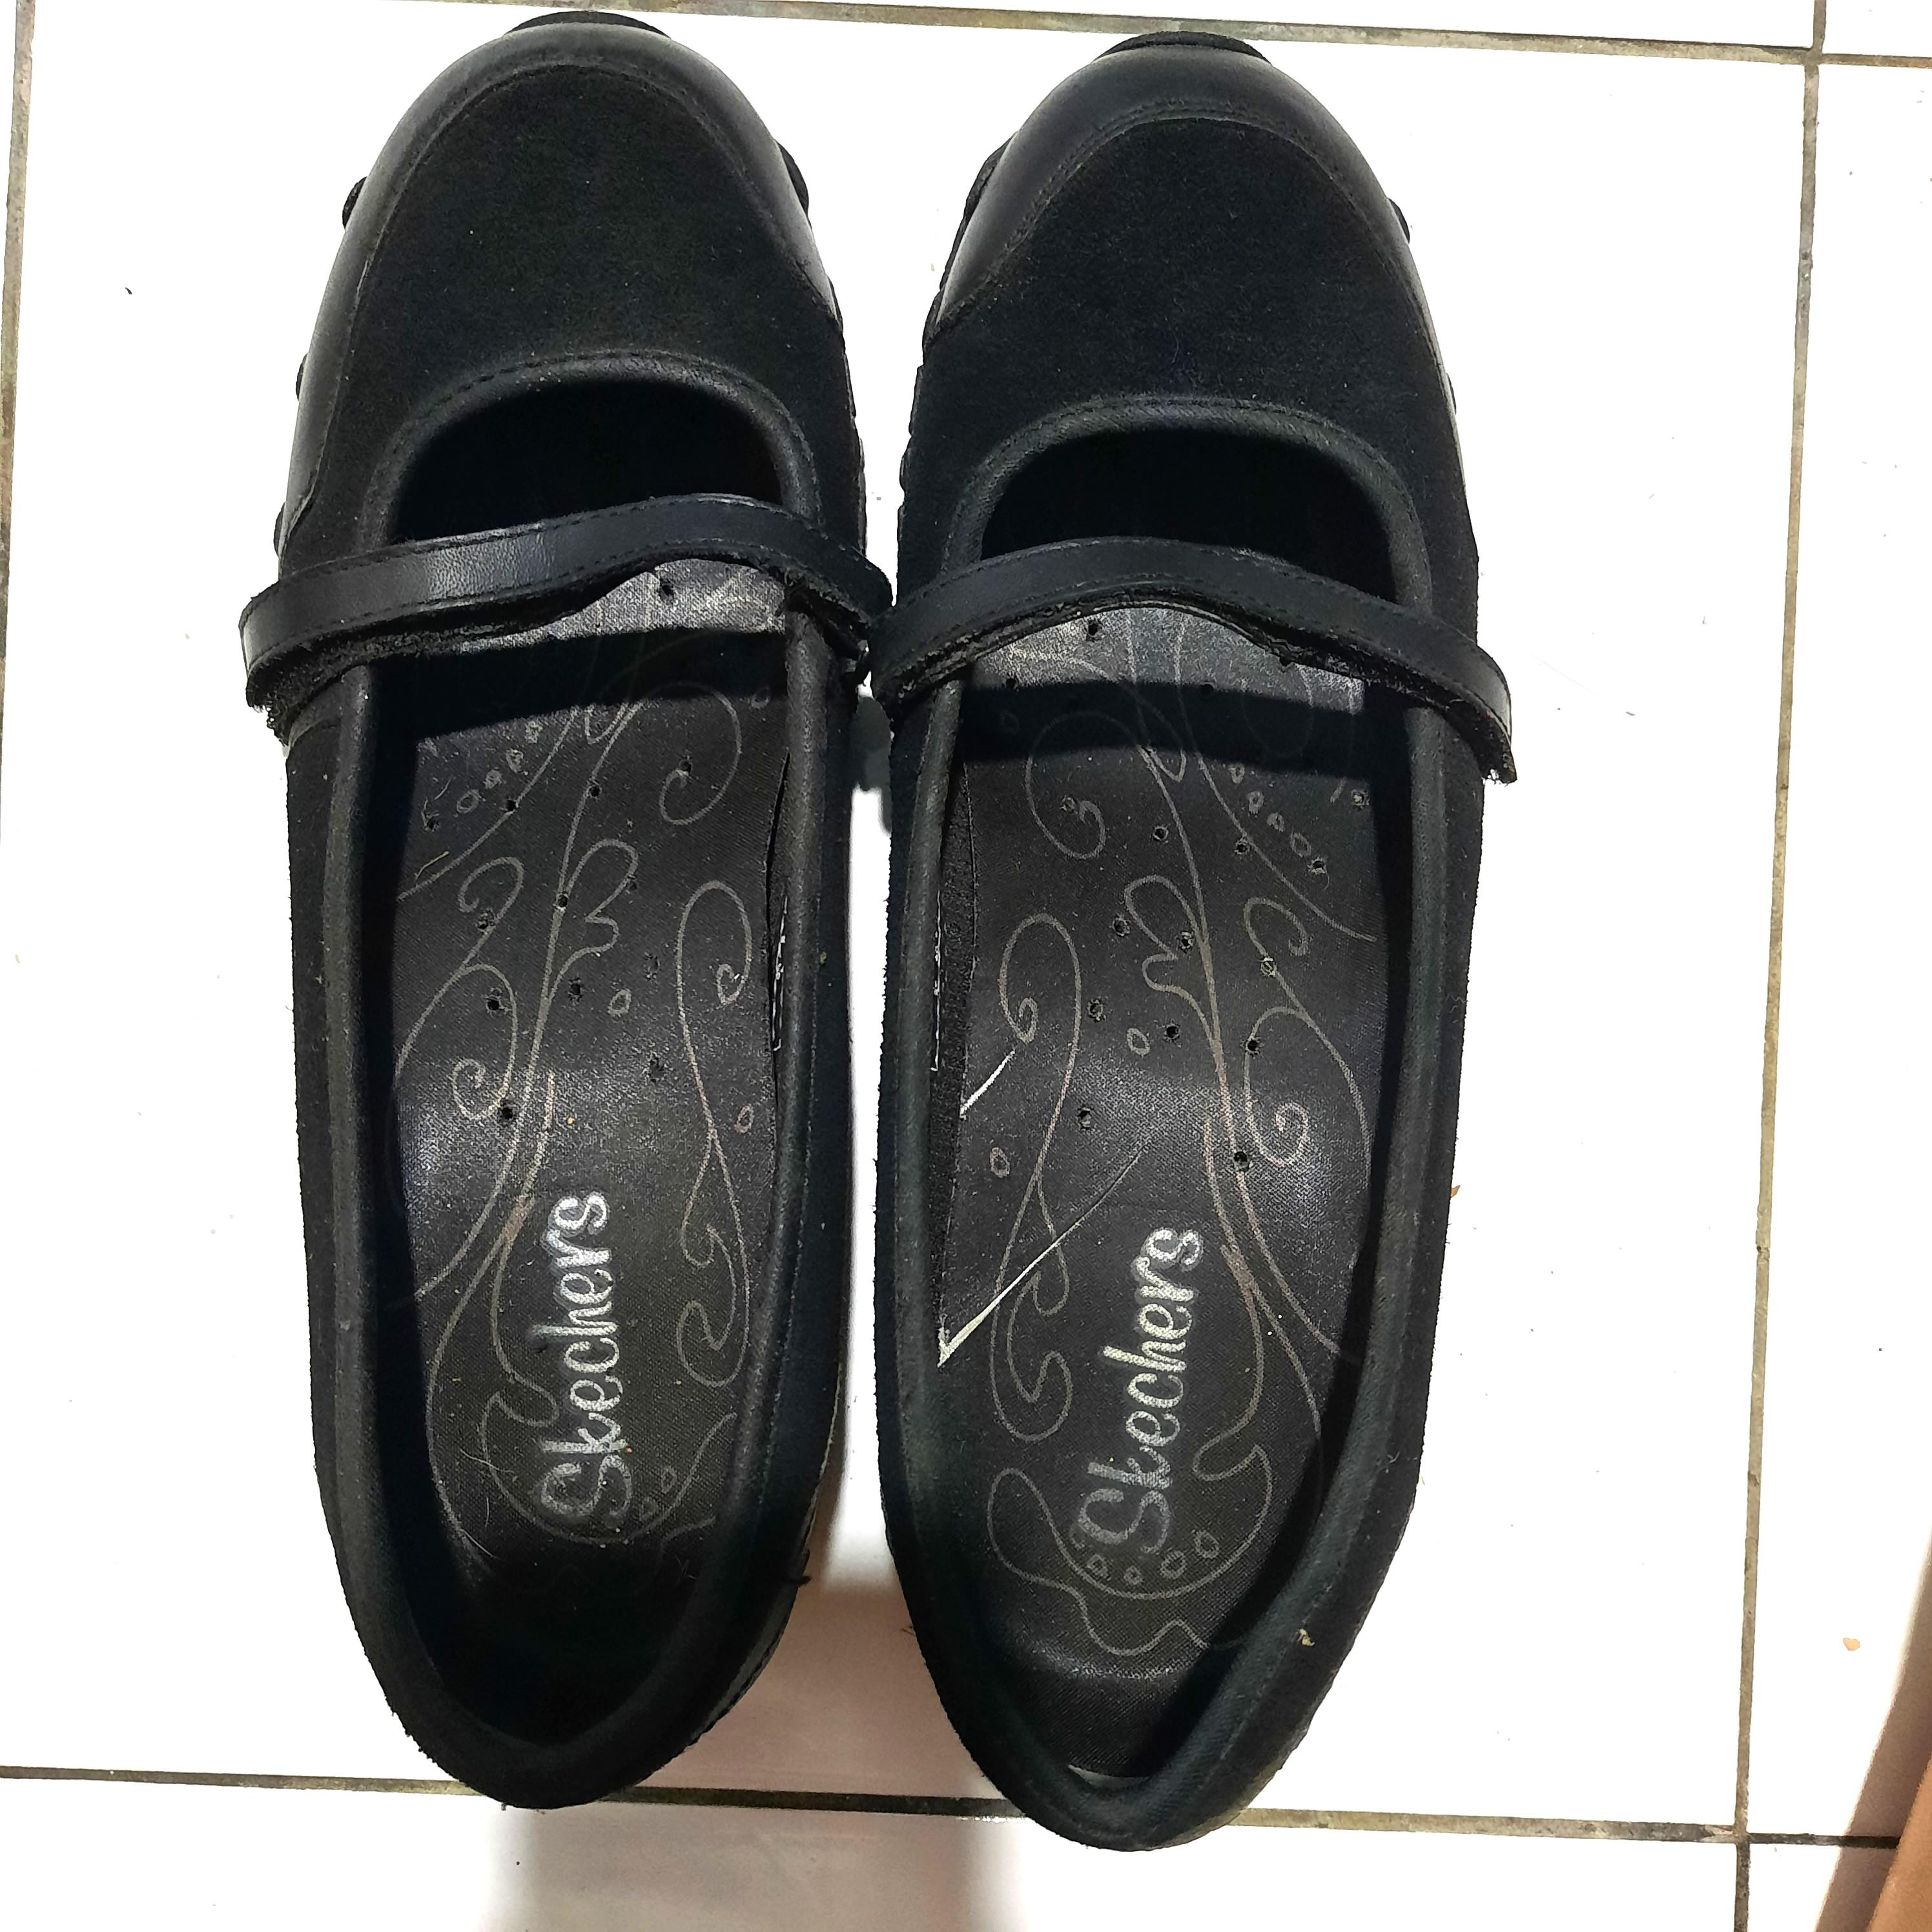 Udled dominere fremtid Skechers Women's Shoes: Sassies Mary Jane - Black, Women's Fashion,  Footwear, Loafers on Carousell